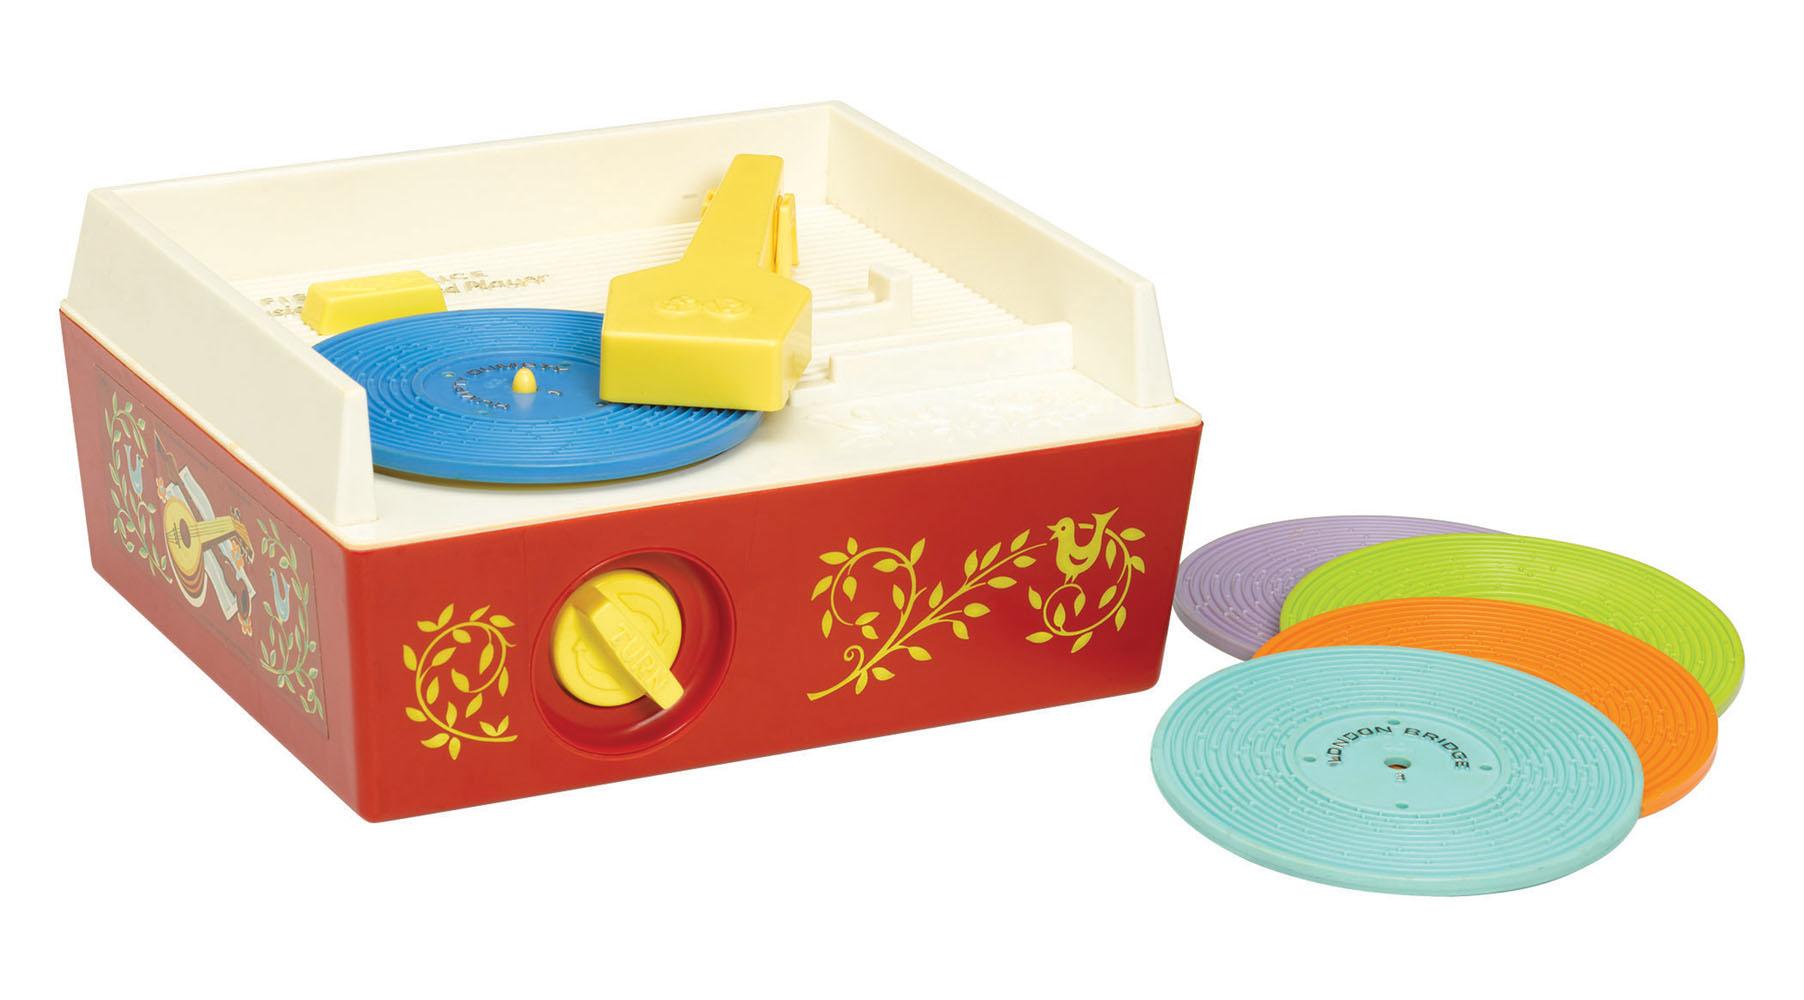 Fisher Price Classics Record Player: Amazon.co.uk: Toys & Games